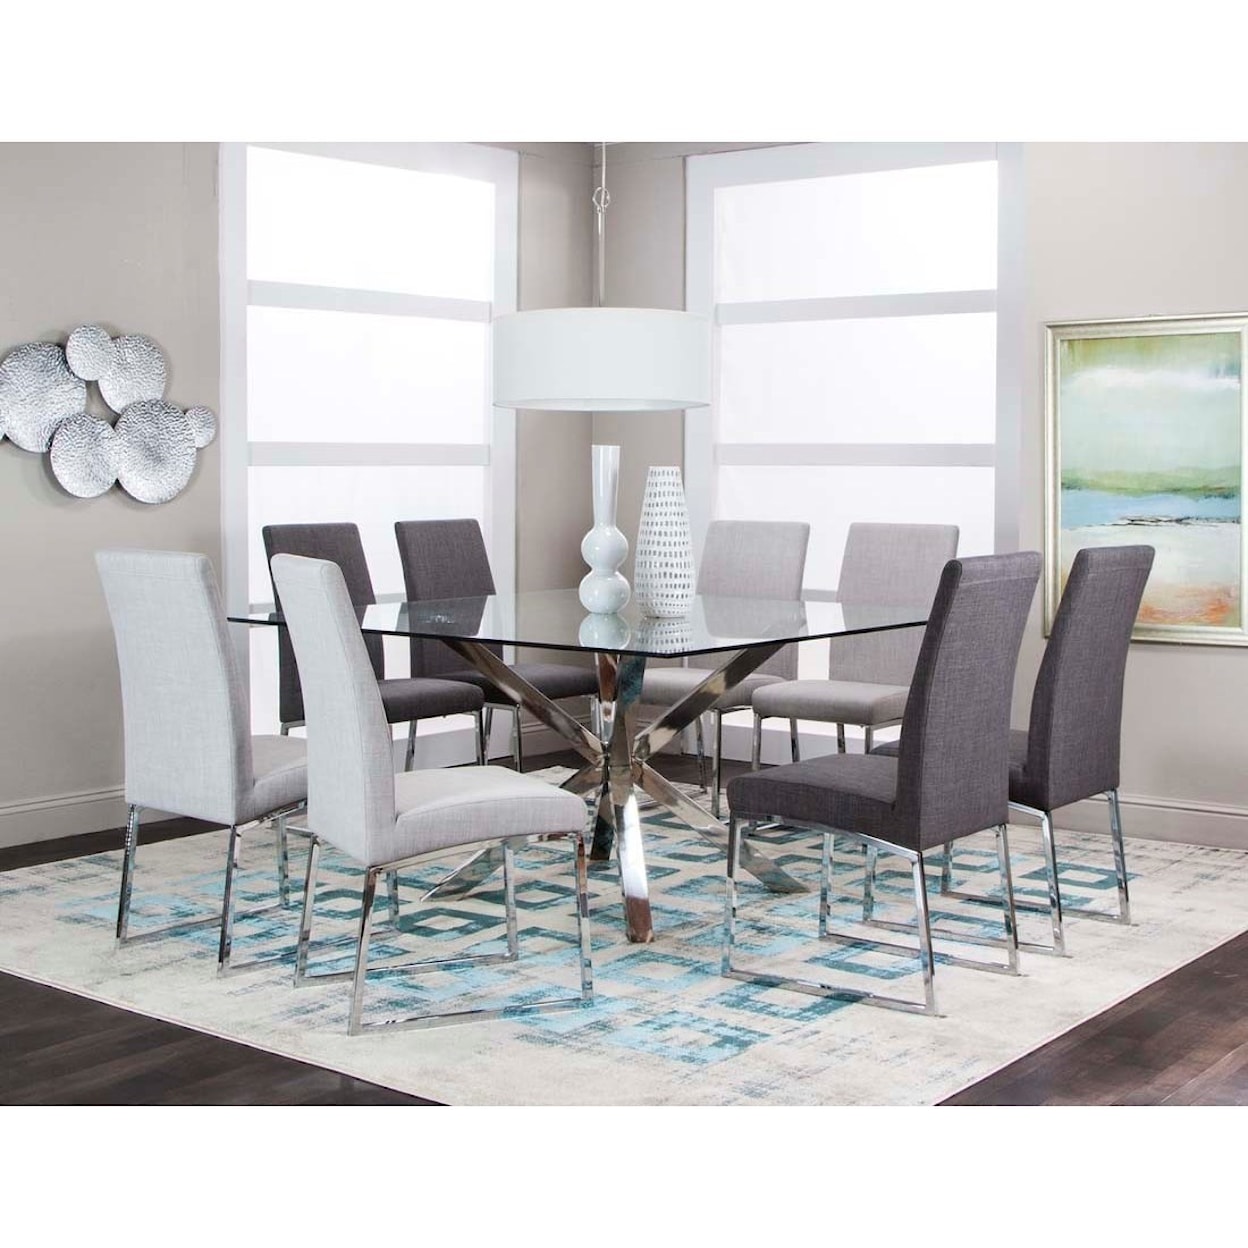 Cramco, Inc Classic 59" Square Glass Dining Table